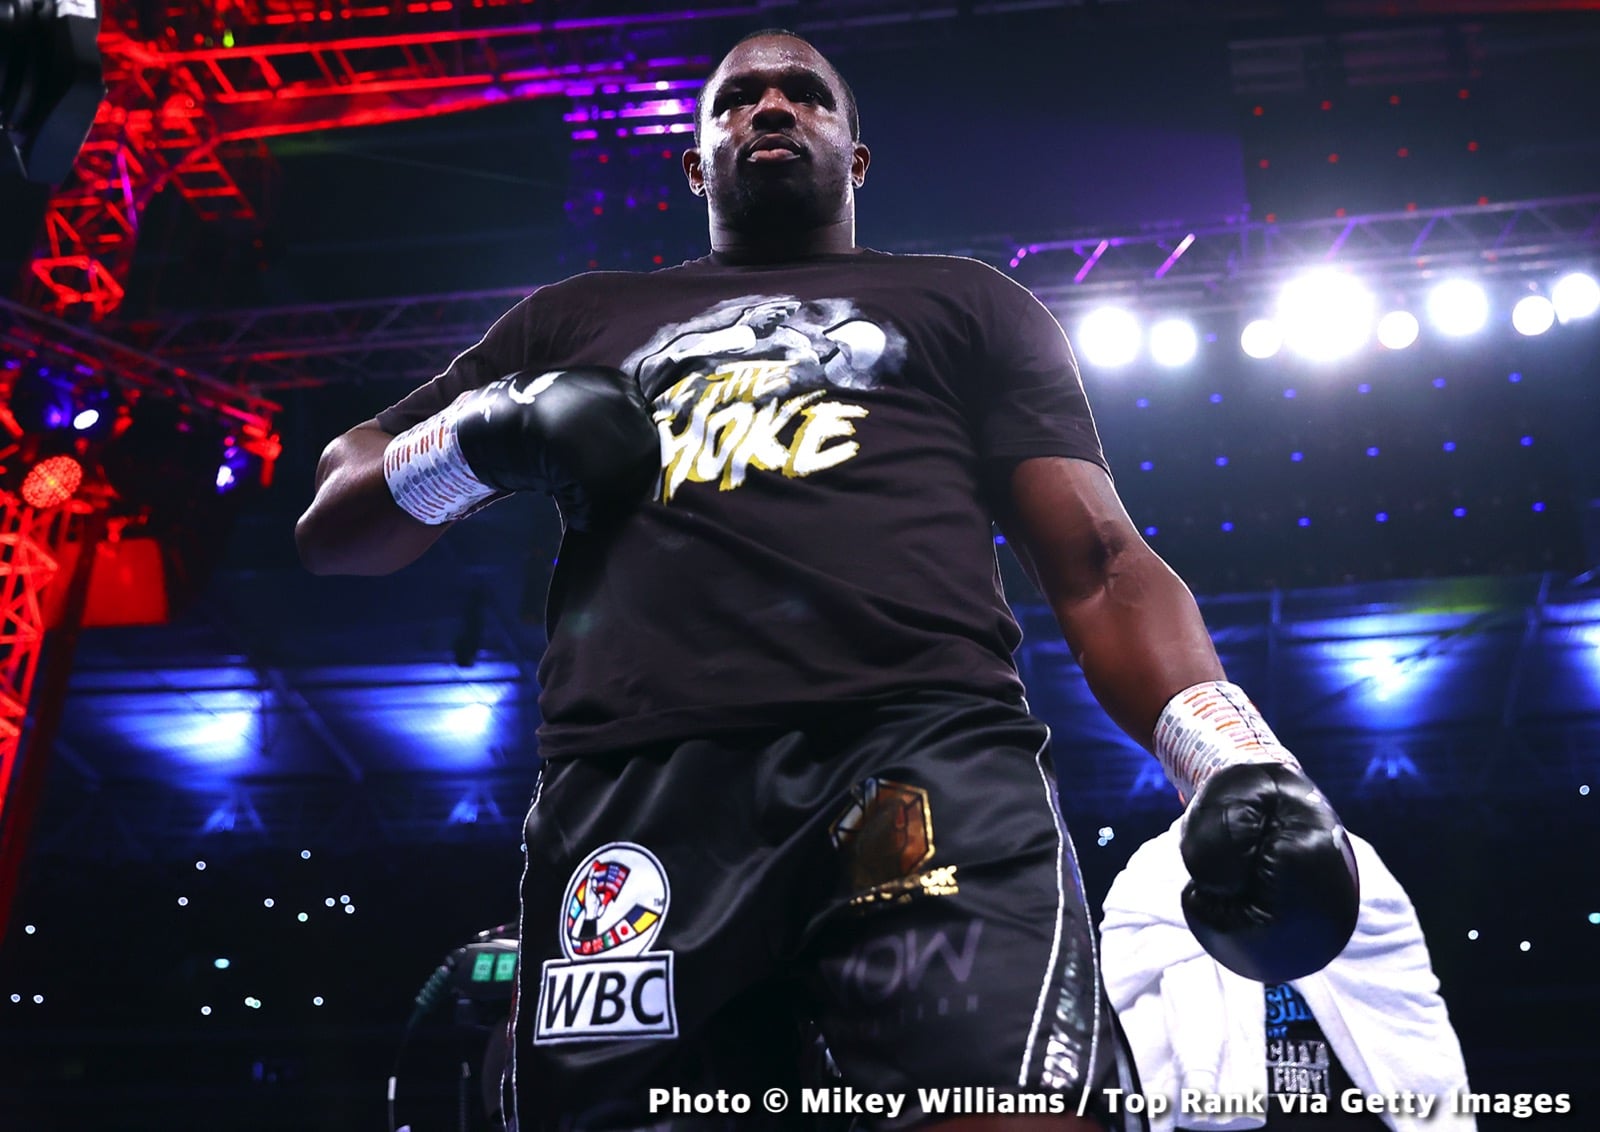 Dillian Whyte wants a rematch, says Fury used "illegal" 2-handed push